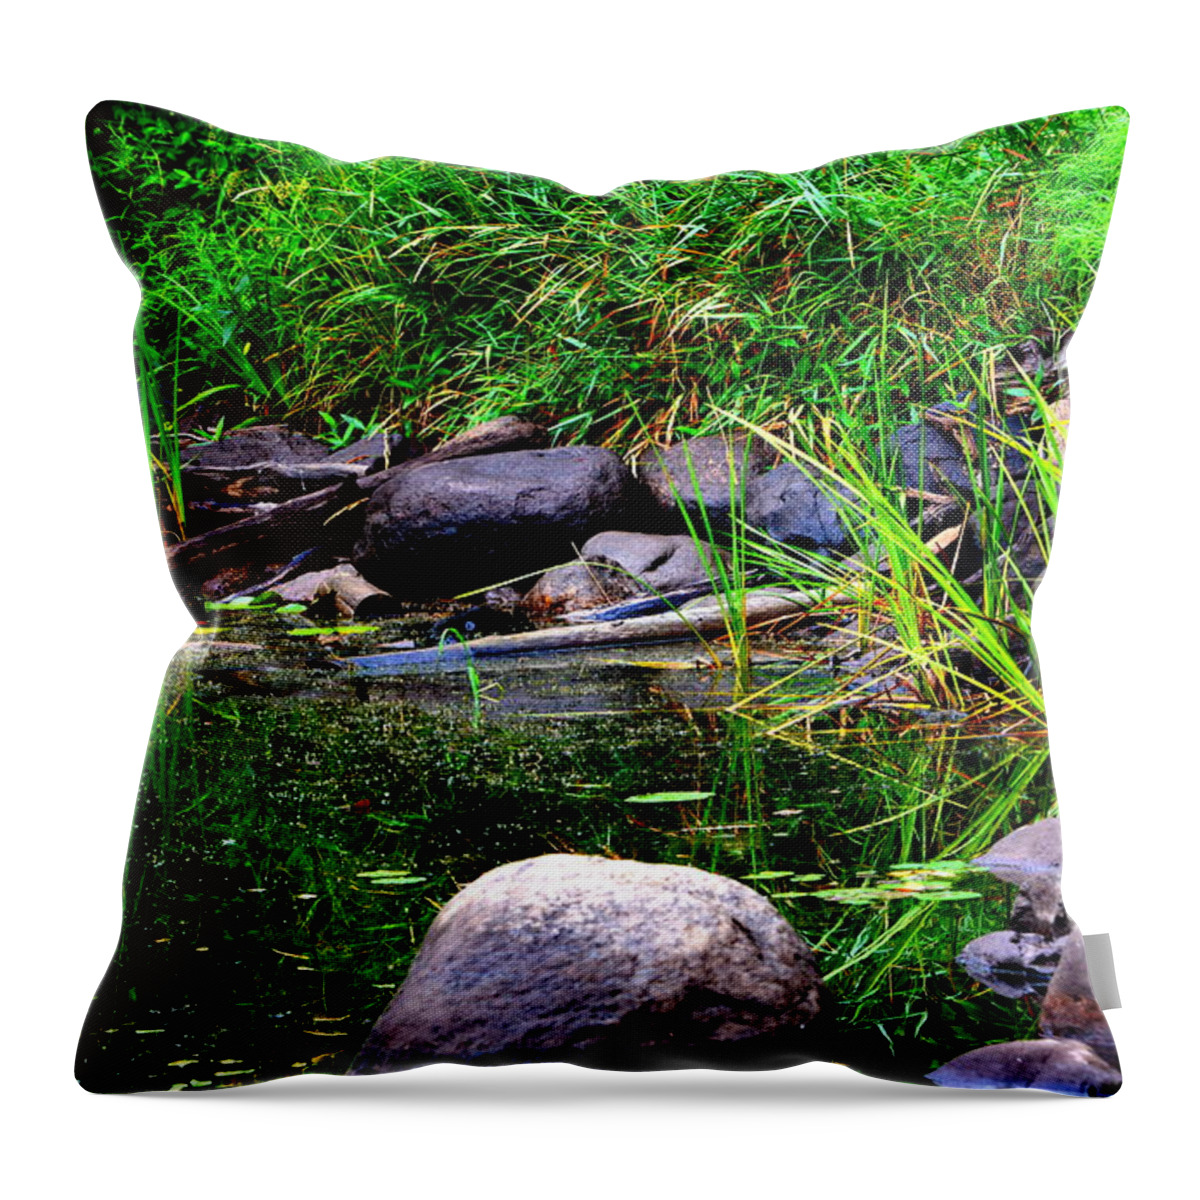 Fishing Throw Pillow featuring the photograph Fishing Pond by Kimberly Woyak